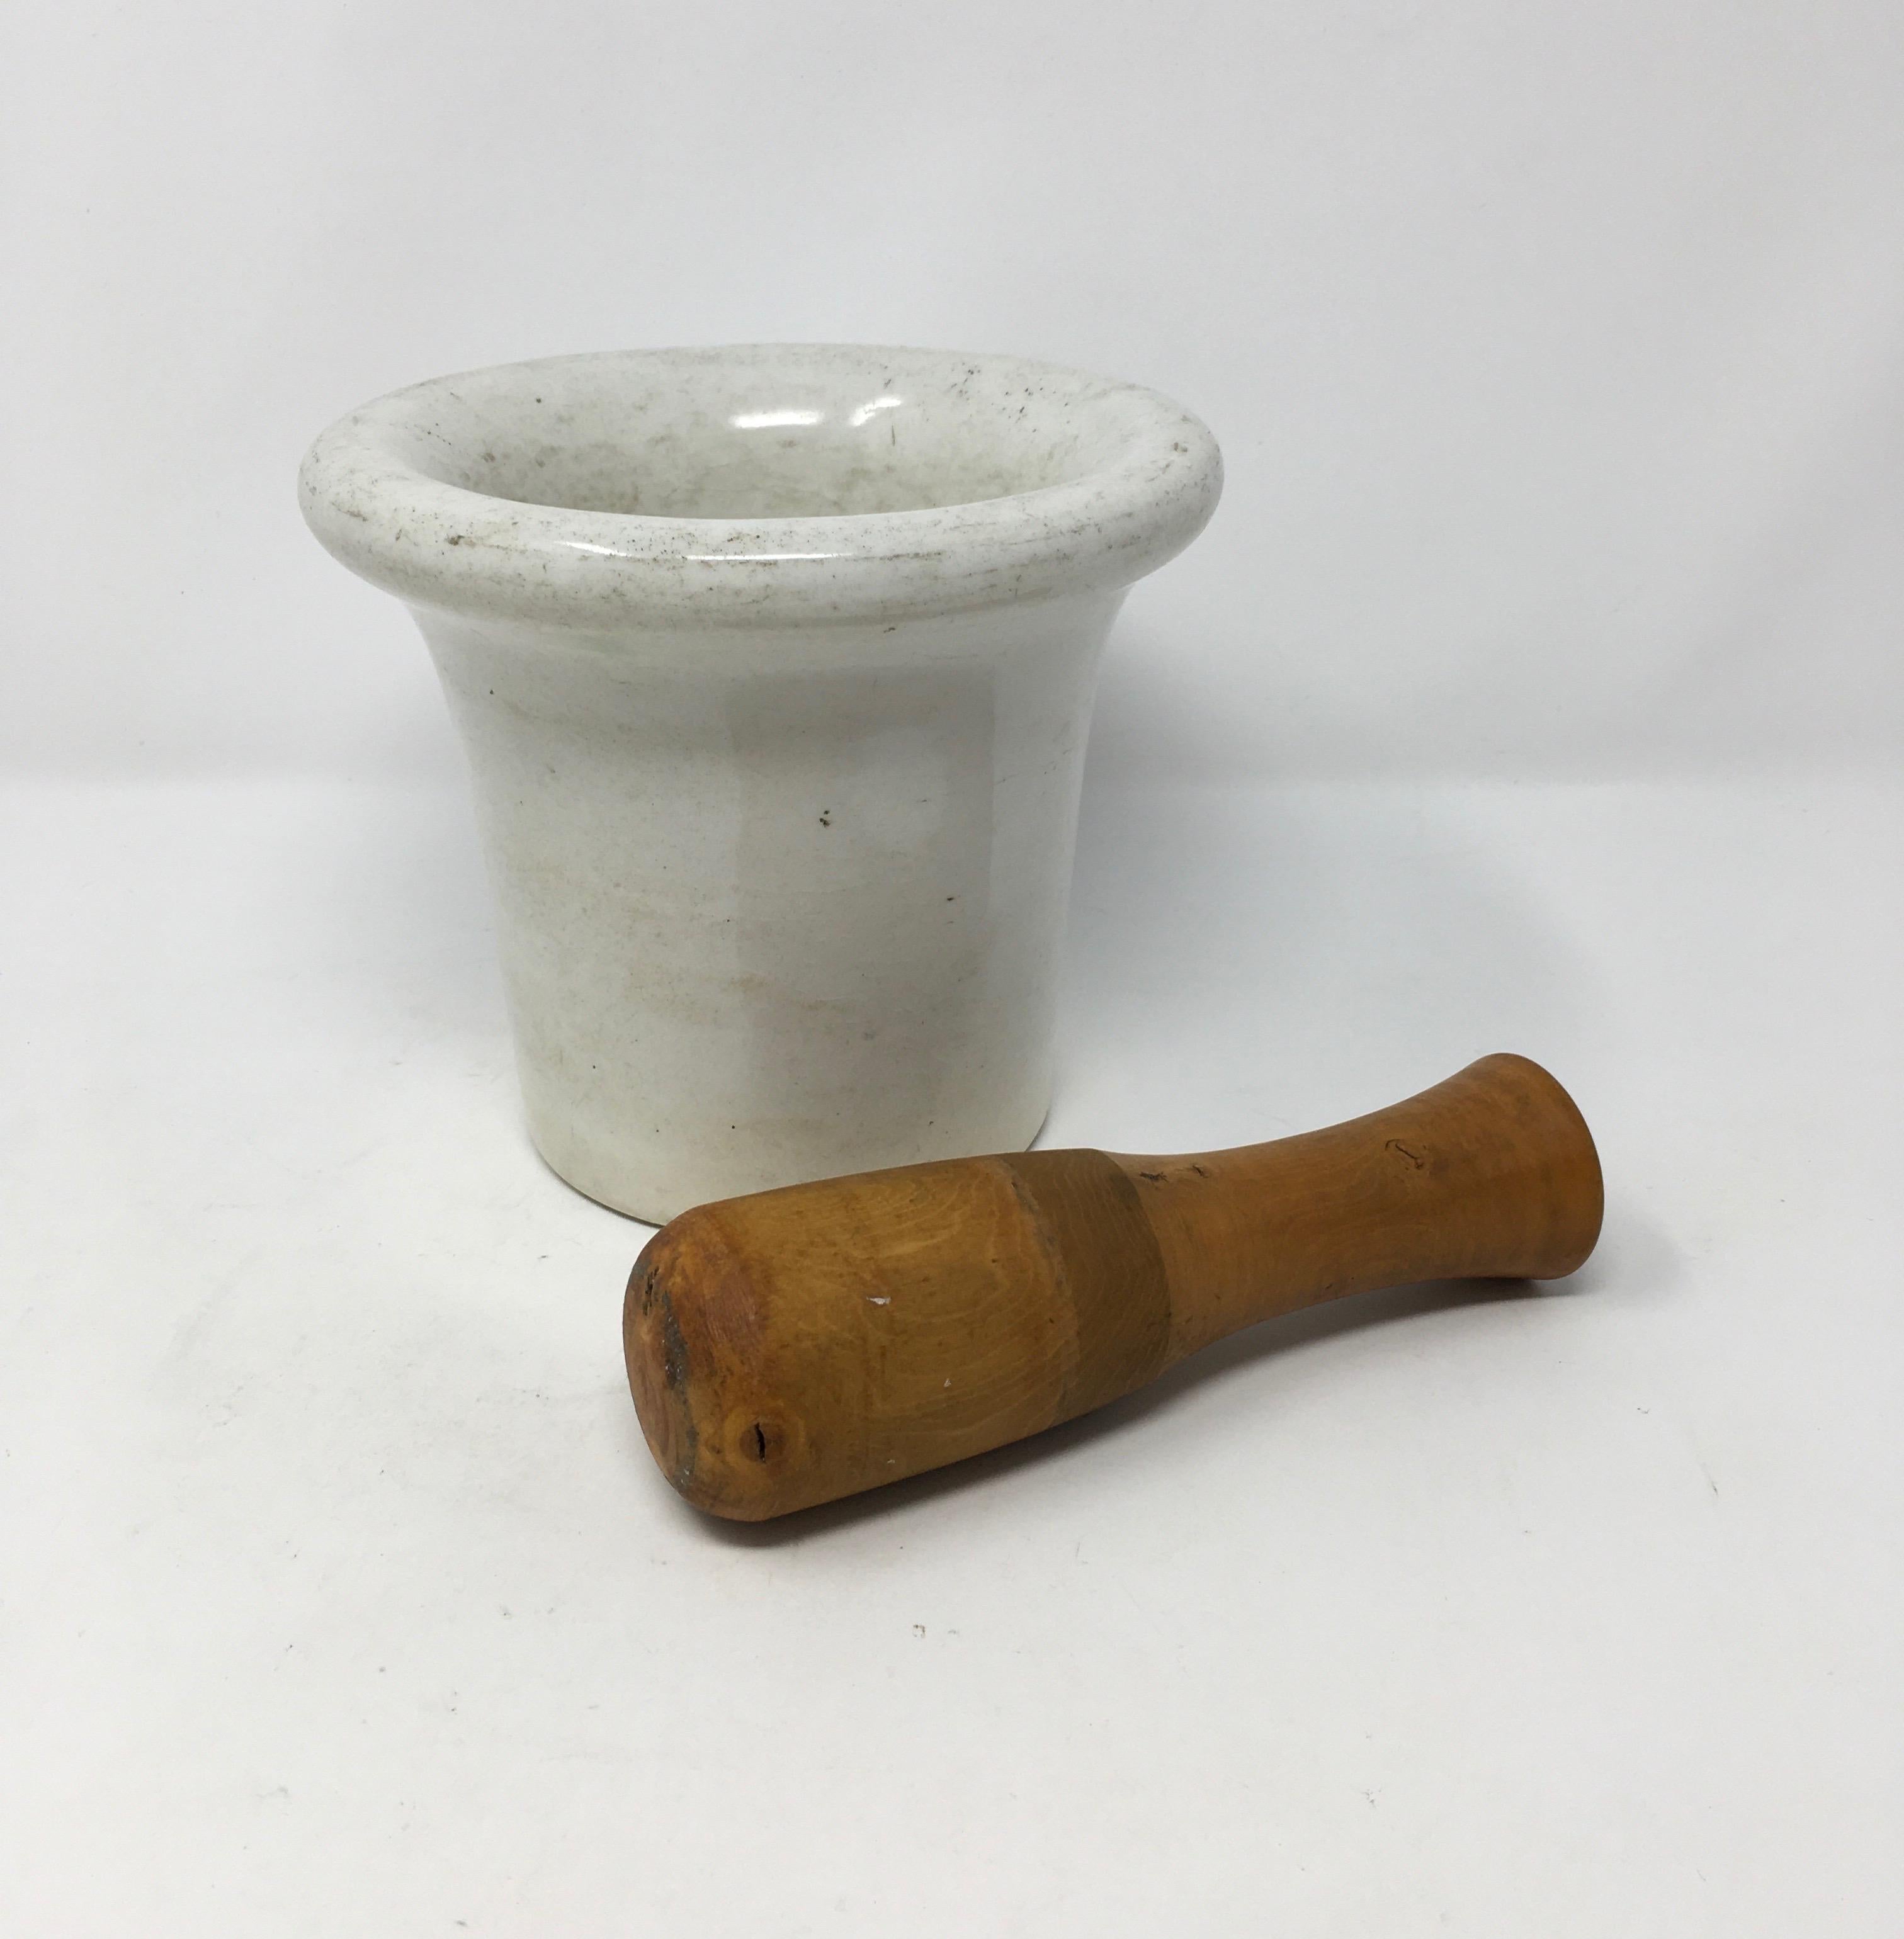 Found in France, these heavy porcelain mortar and pestles were once used in French pharmacies for medicinal herbs. This piece would look wonderful in a kitchen and useful to prepare salads, sauces or crushed herbs and spices
Mortar:
Measures: 6